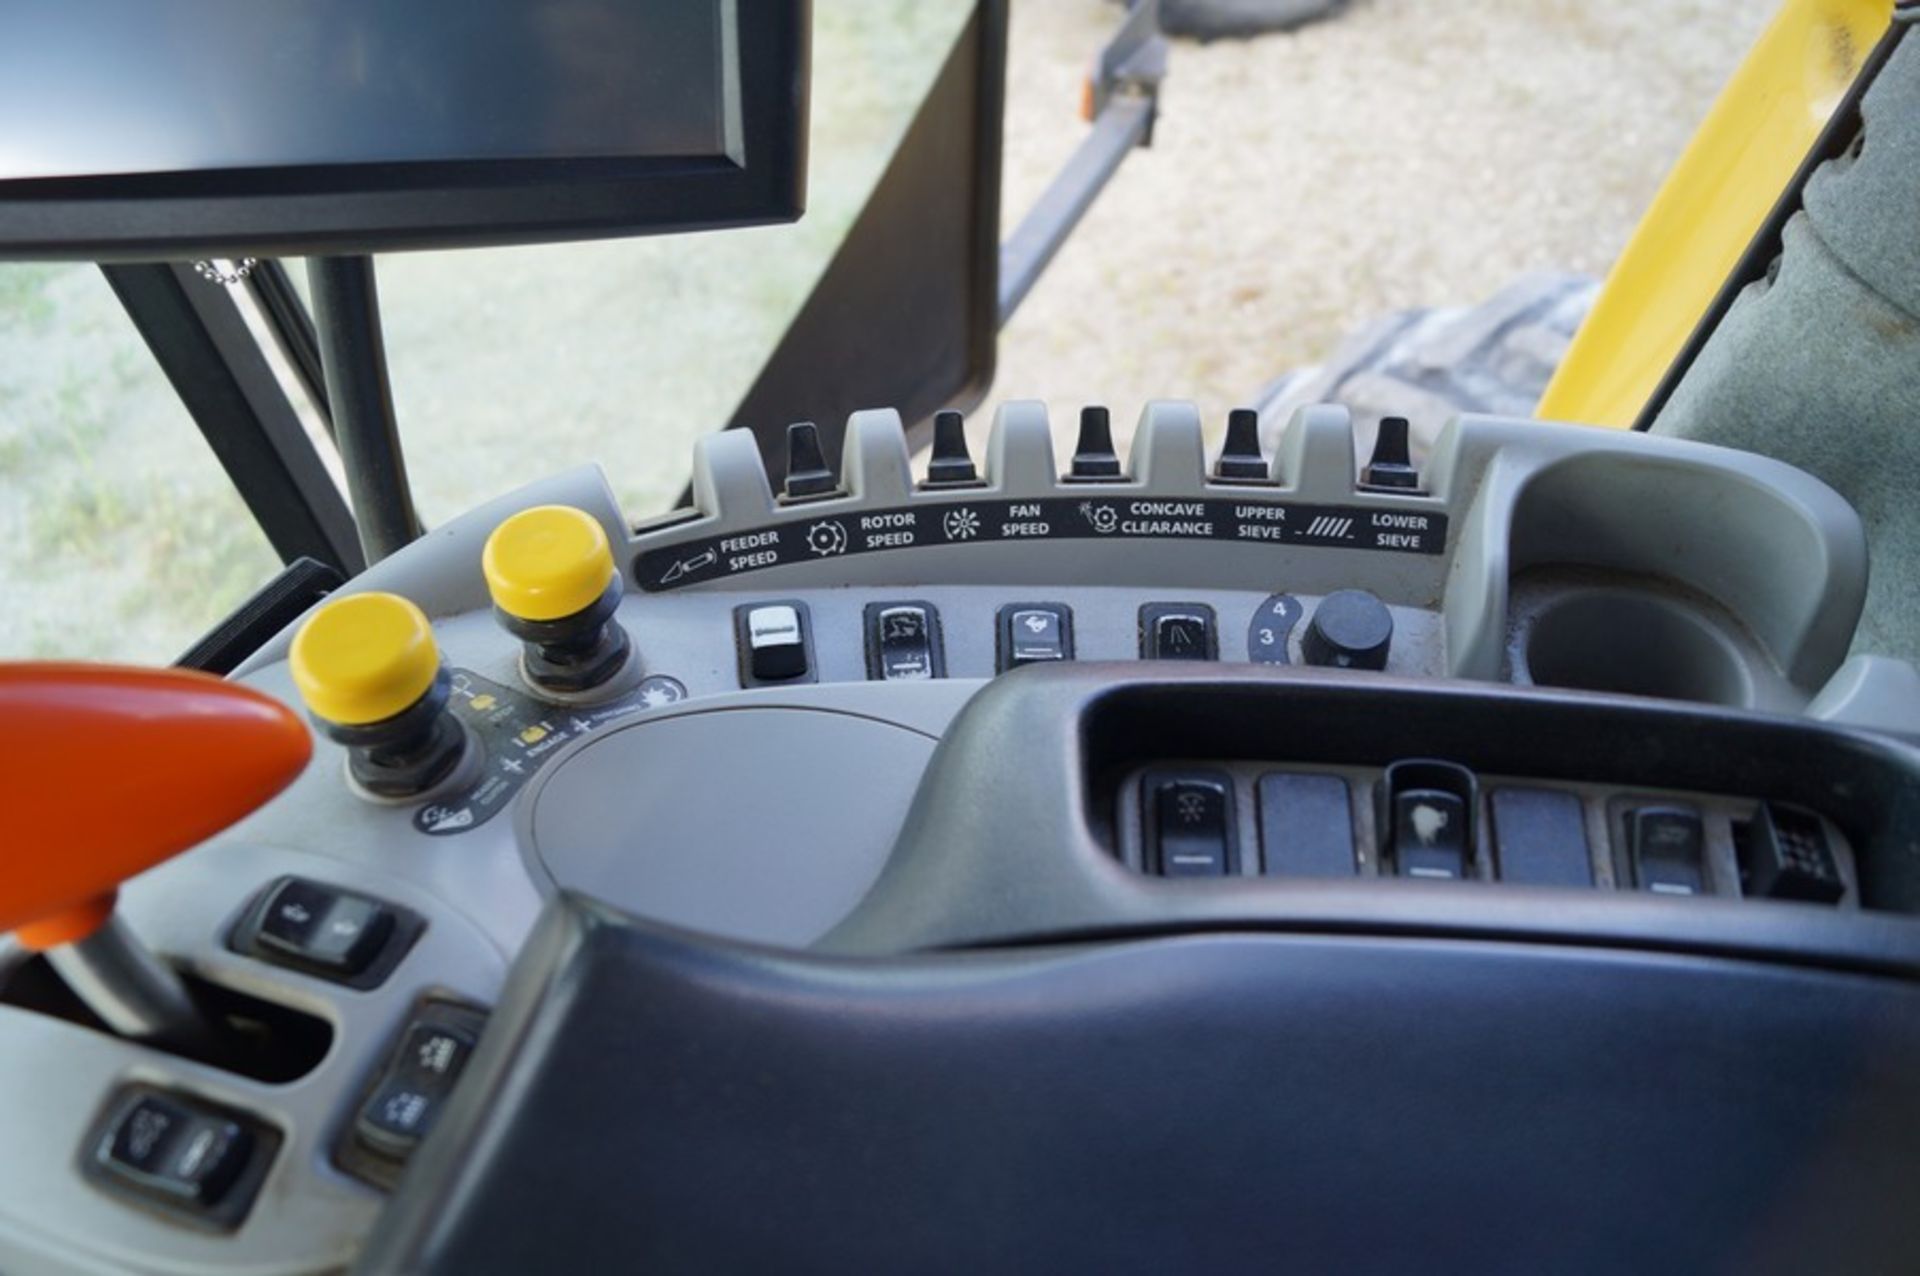 2008 NEW HOLLAND CX8080 Combine Harvester, 4700 Sep.hrs - Image 11 of 24